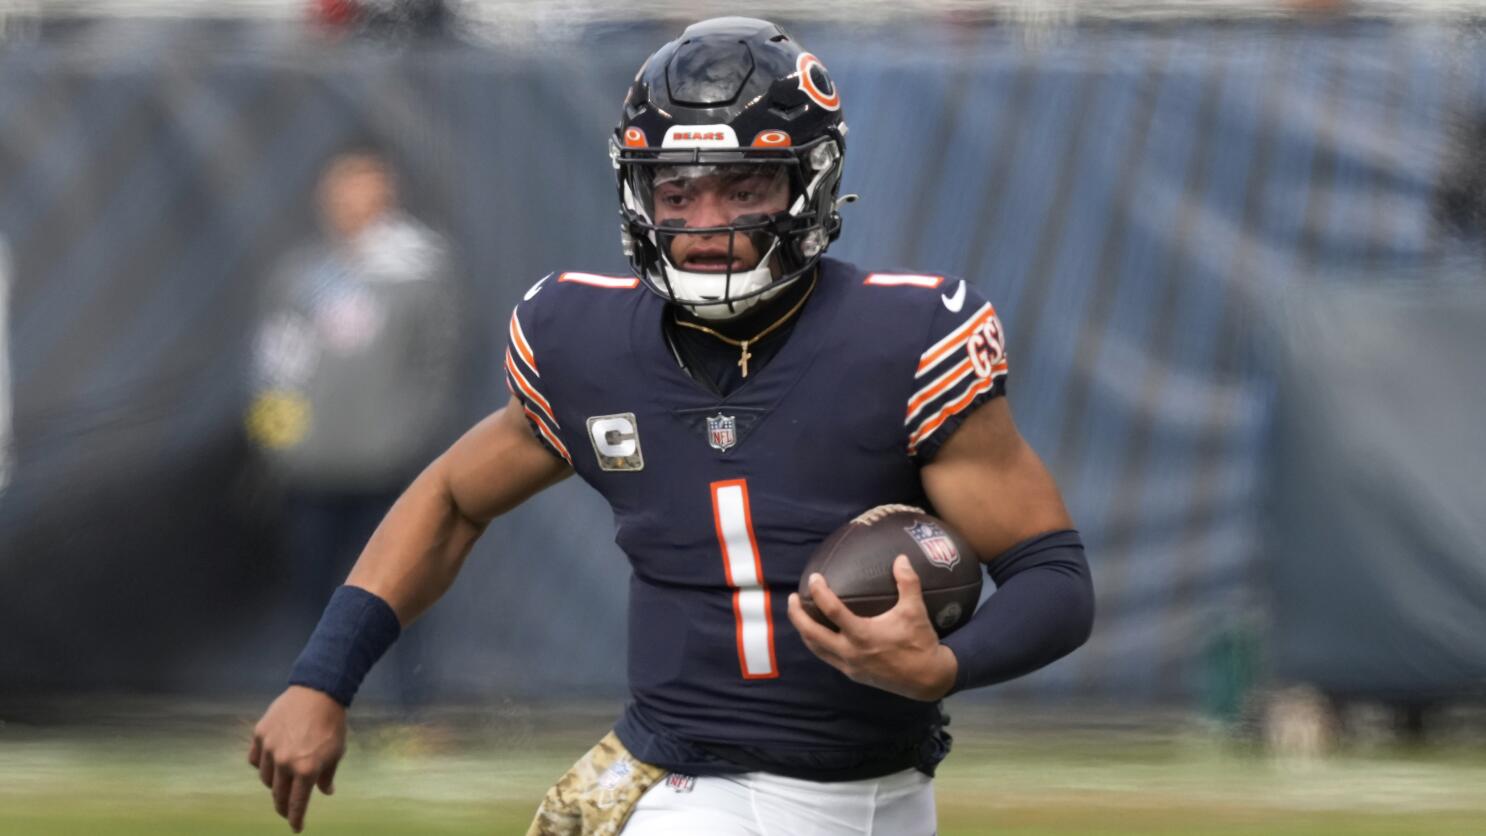 State of the 2022 Chicago Bears: Justin Fields, new regime provide hope